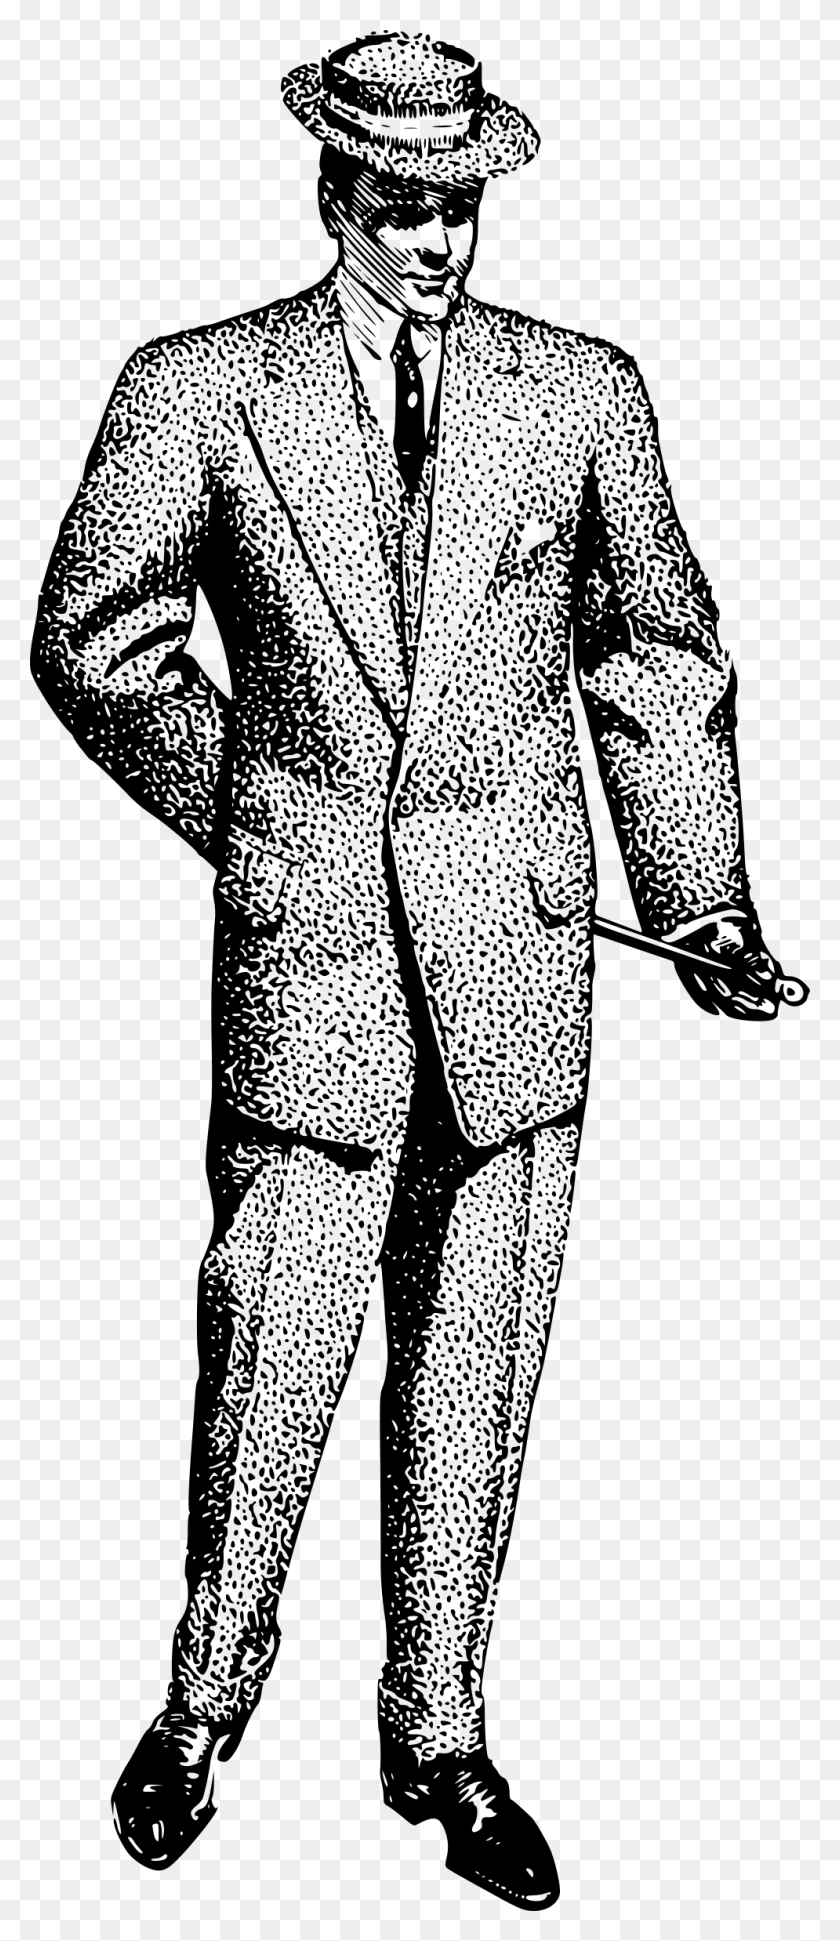 995x2400 This Free Icons Design Of Man In A Cool Suit Mans Blezer Blanco Y Negro Clip Art, Grey, World Of Warcraft Hd Png